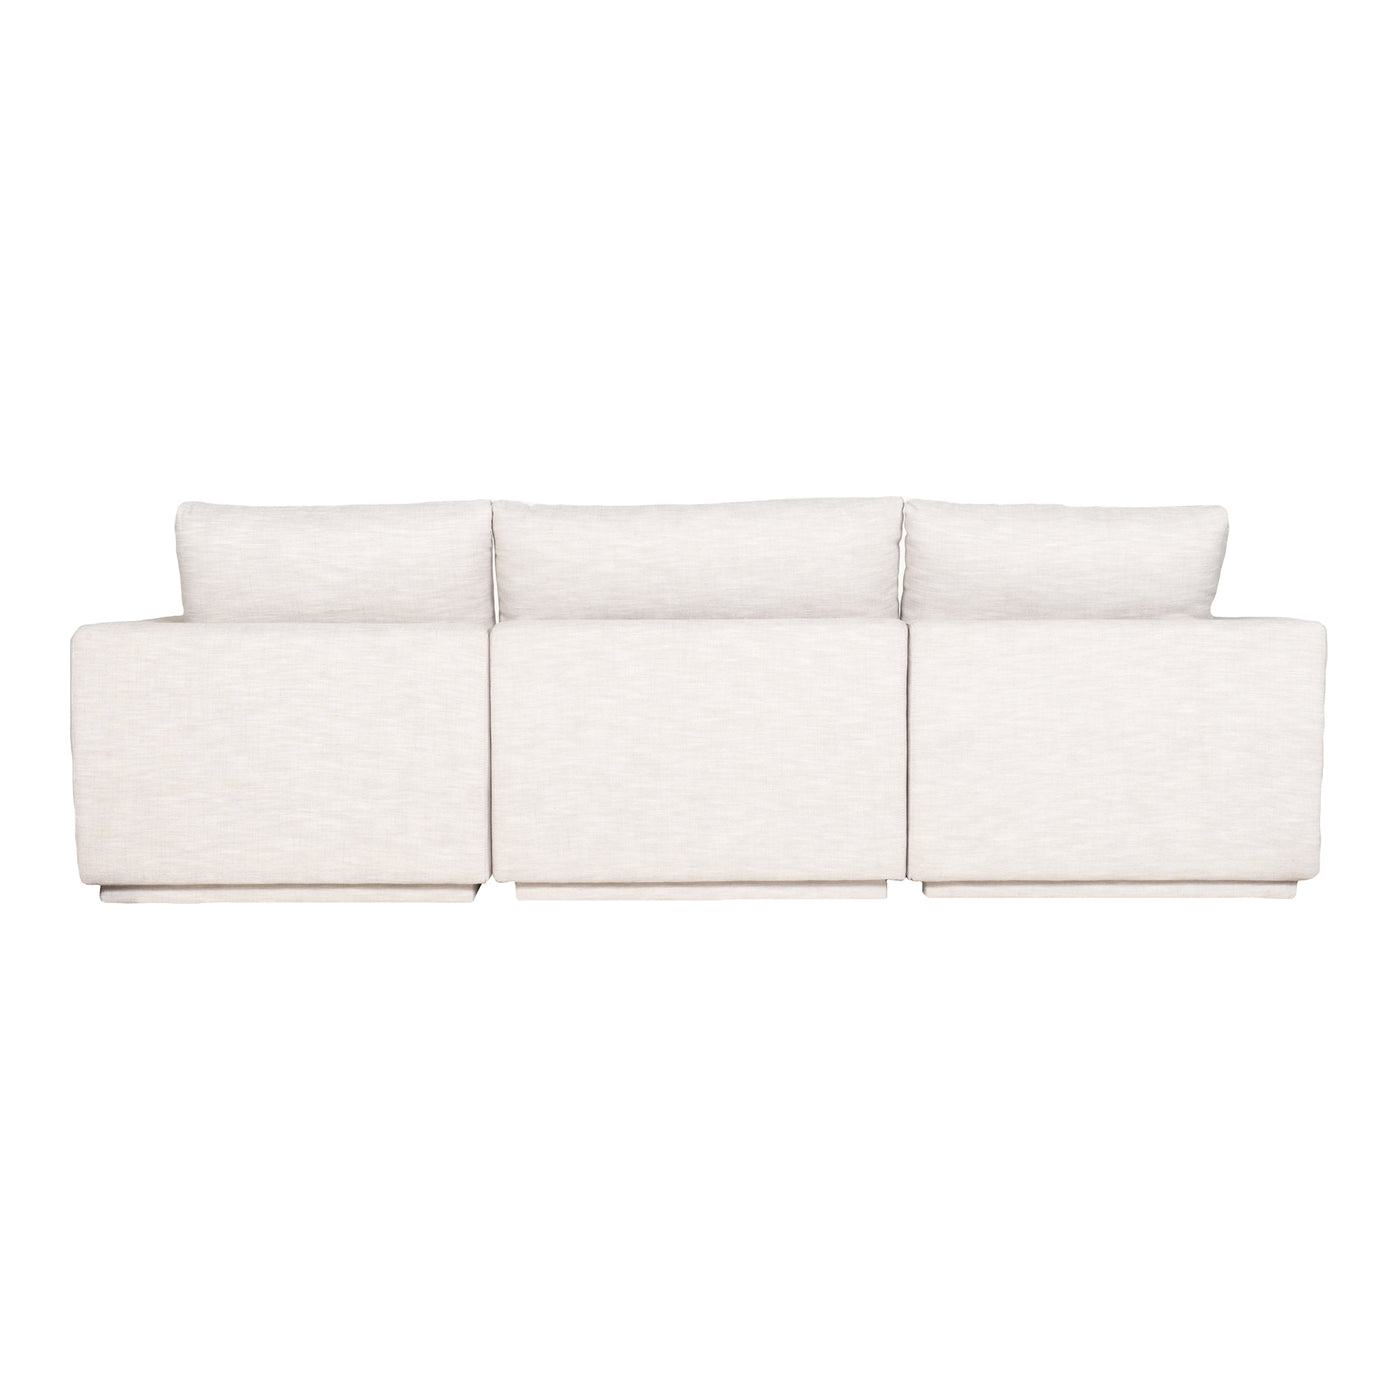 An everyday modular marvel. The Justin modular sectional is all about options, so sizing and space-fitting are up to you u...